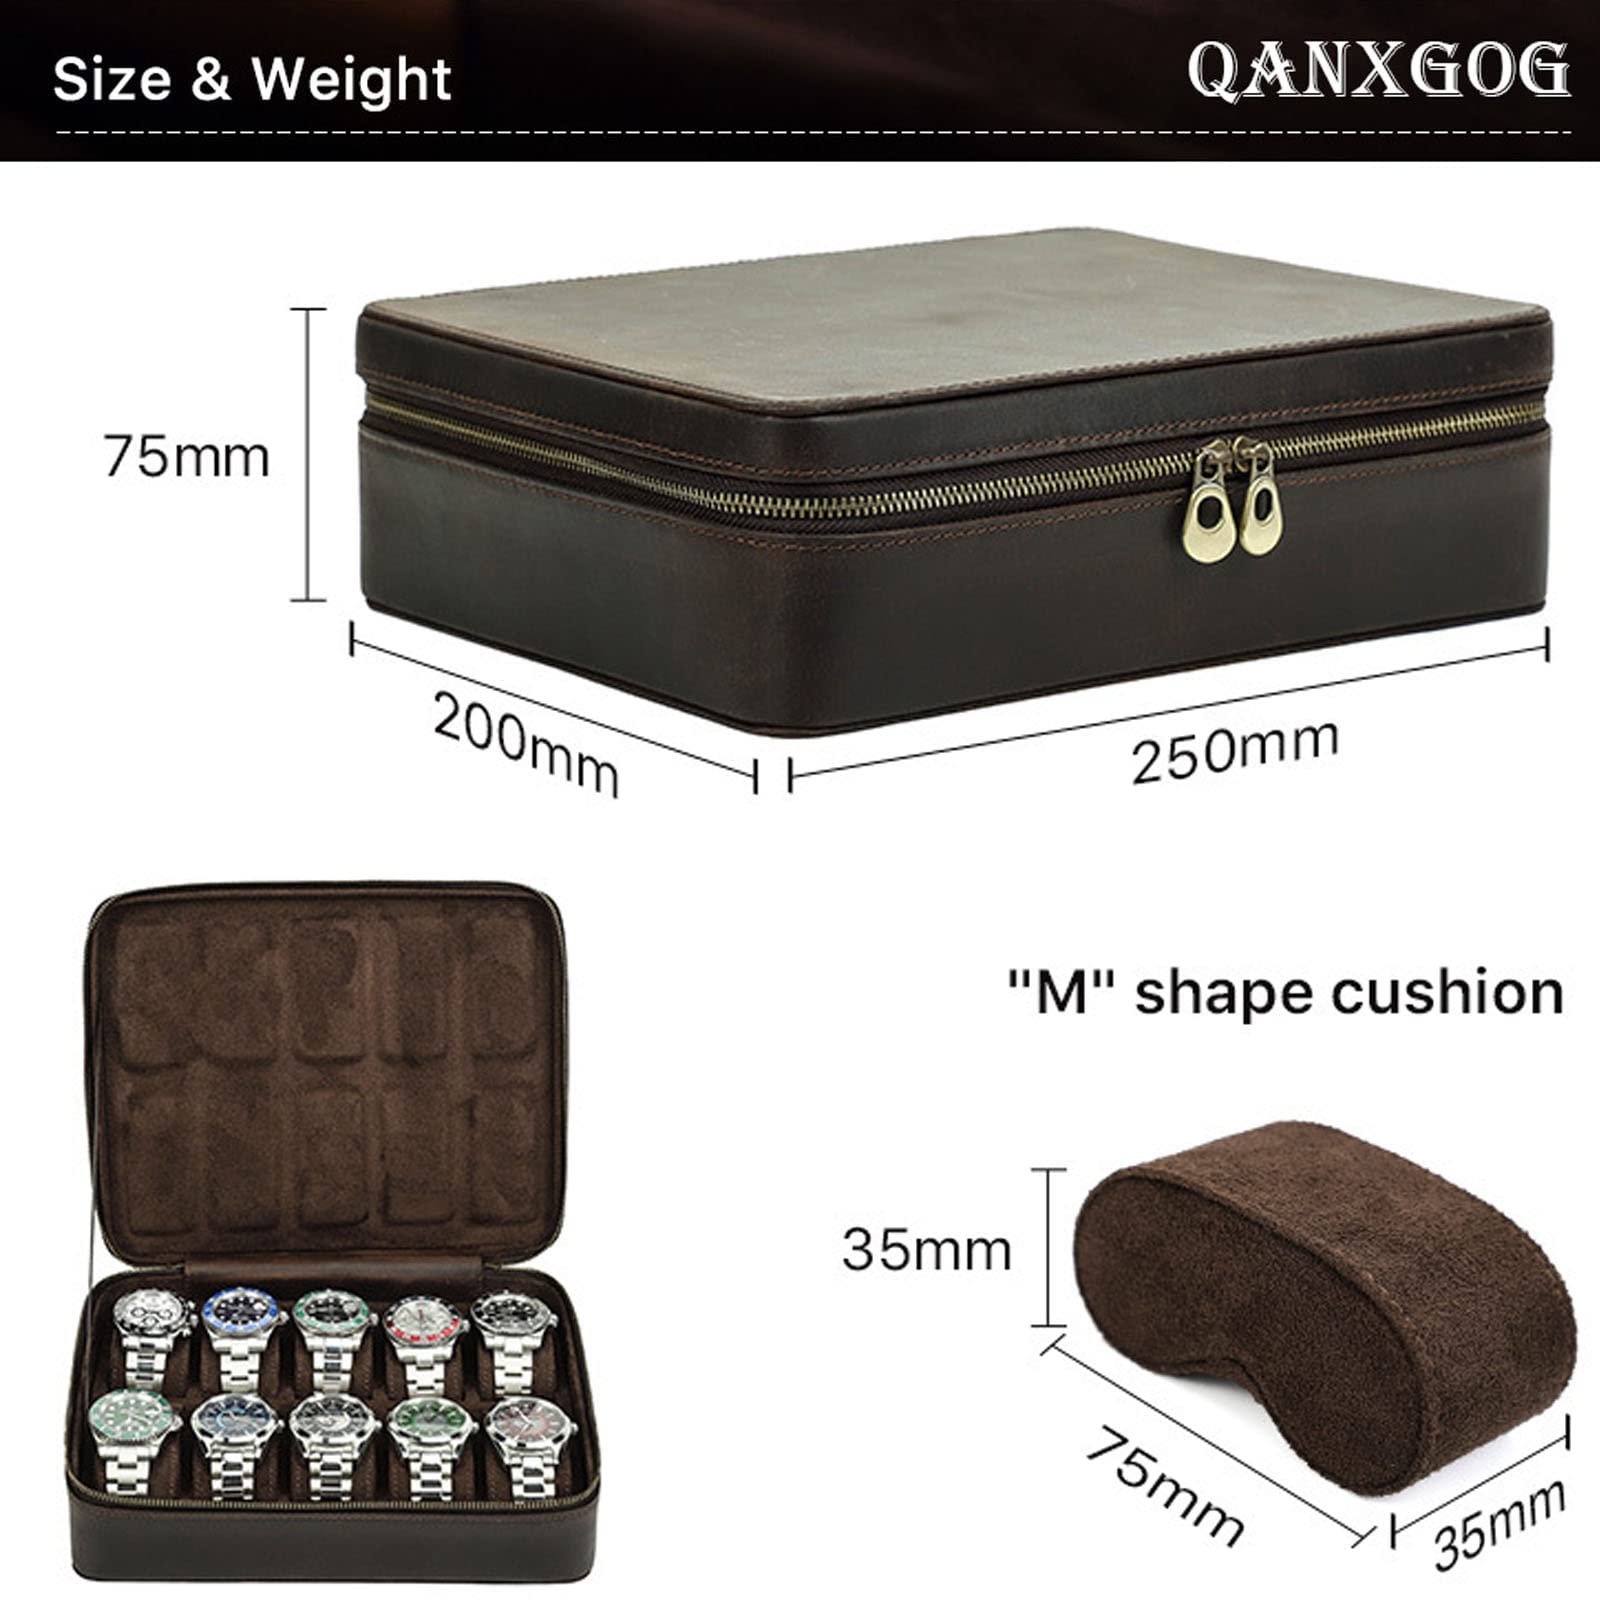 QANXGOG Genuine Leather 10 Slots Rectangle Watch Box Business Travel Case, High Capacity Travel Case Businss Gift Roll Jewelry Coin Box for Men Women